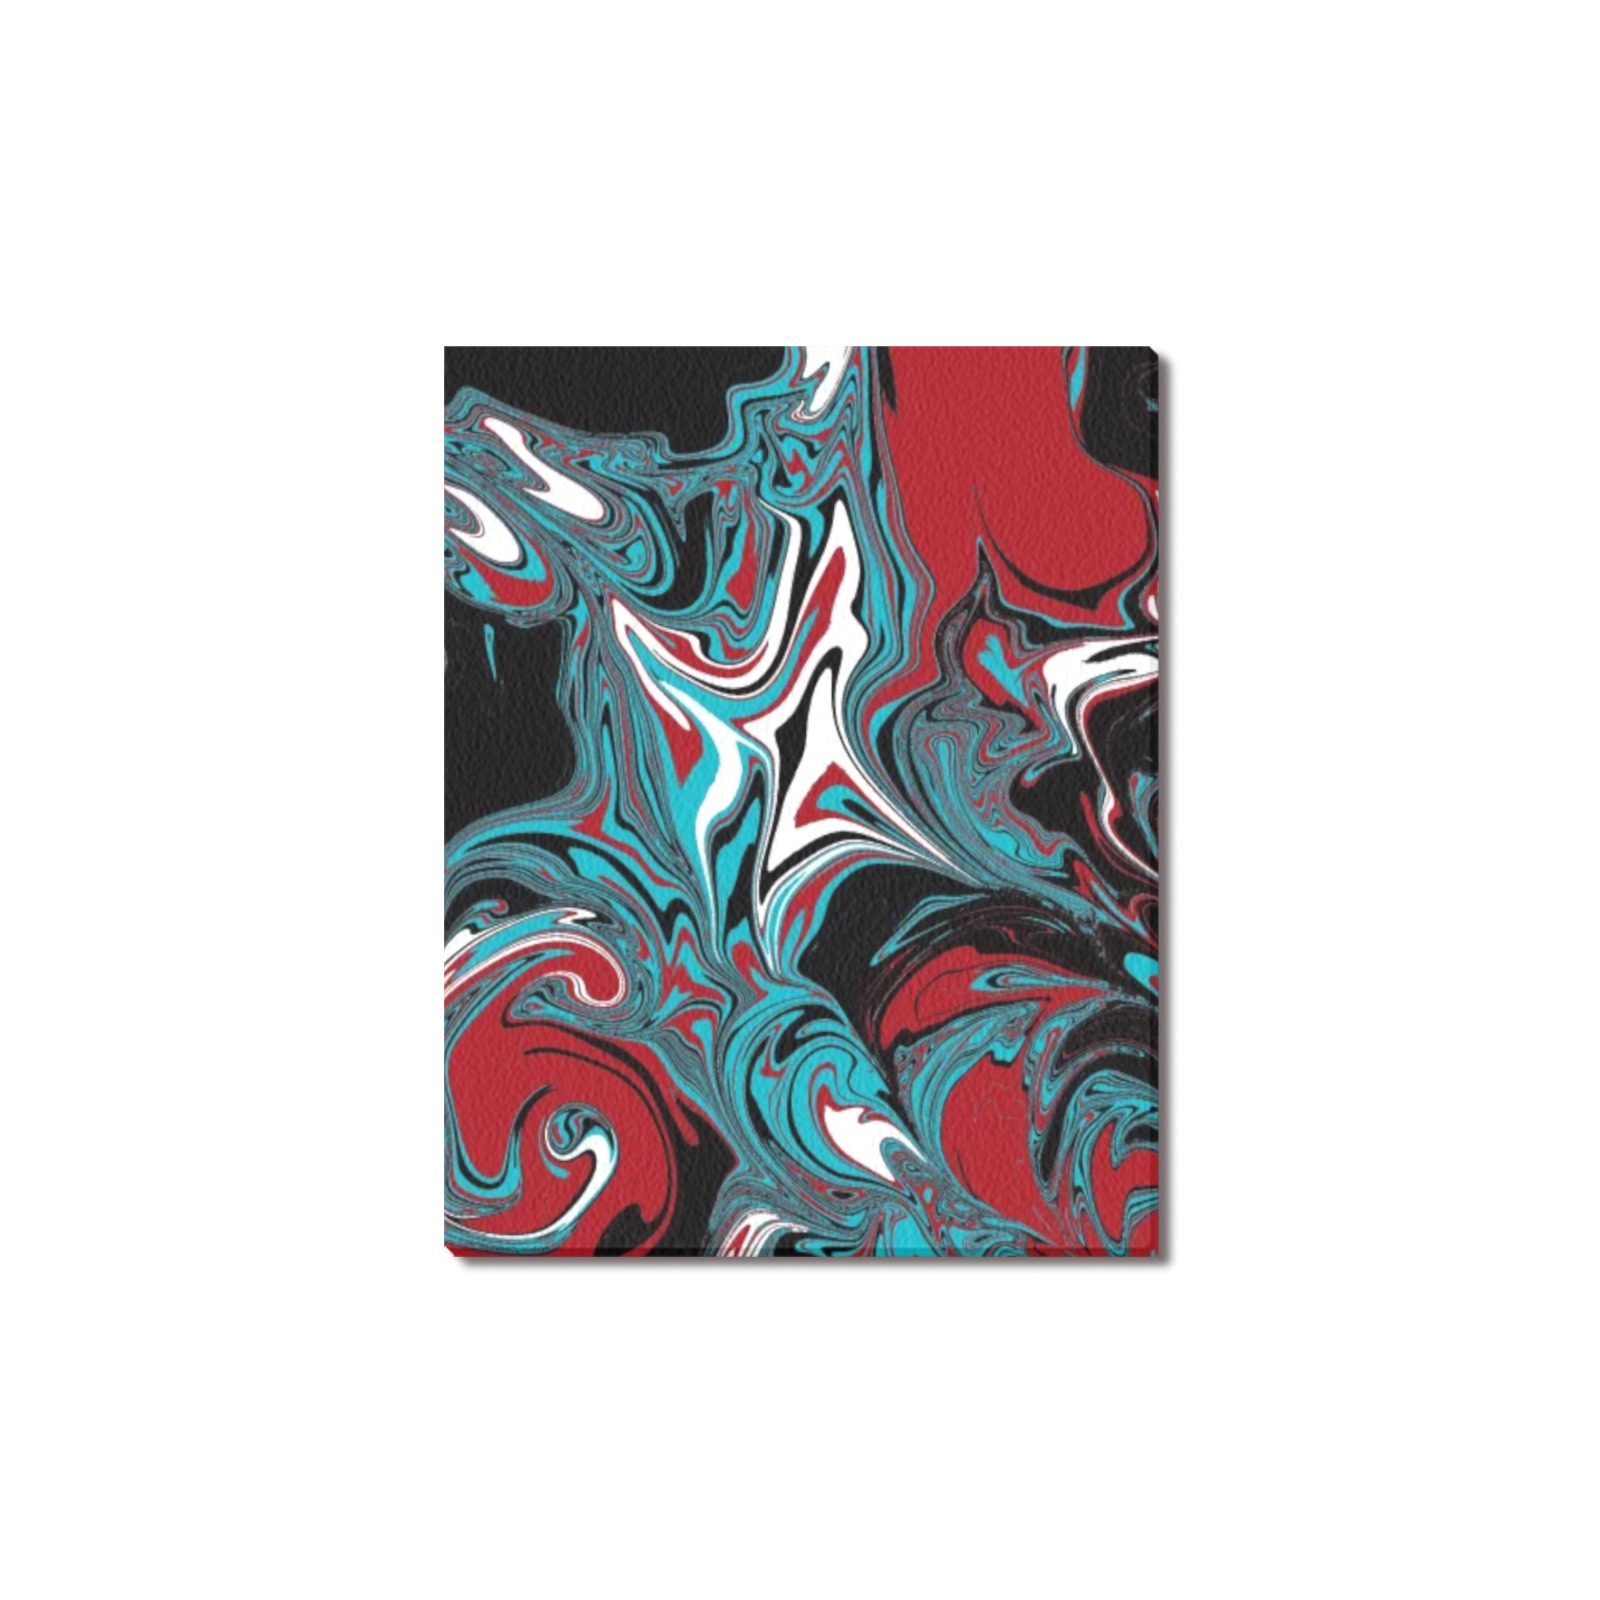 Dark Wave of Colors Upgraded Canvas Print 11"x14"